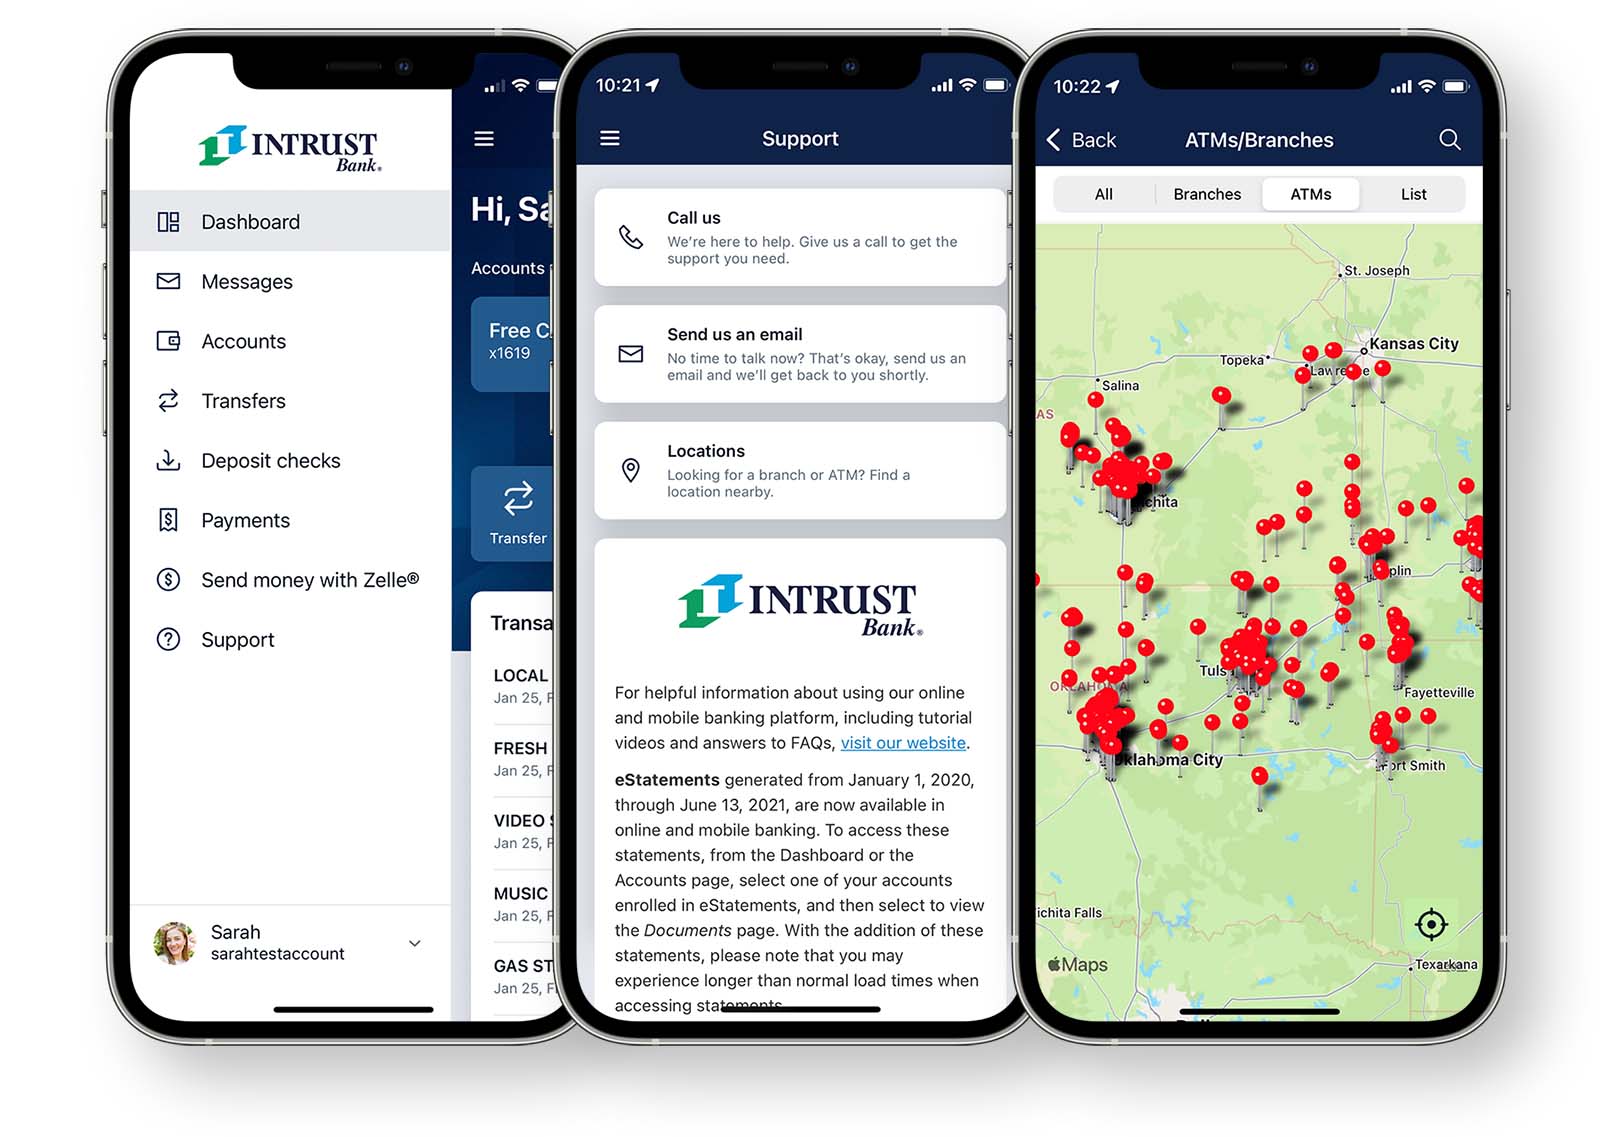 INTRUST Bank mobile app locations map on iPhone